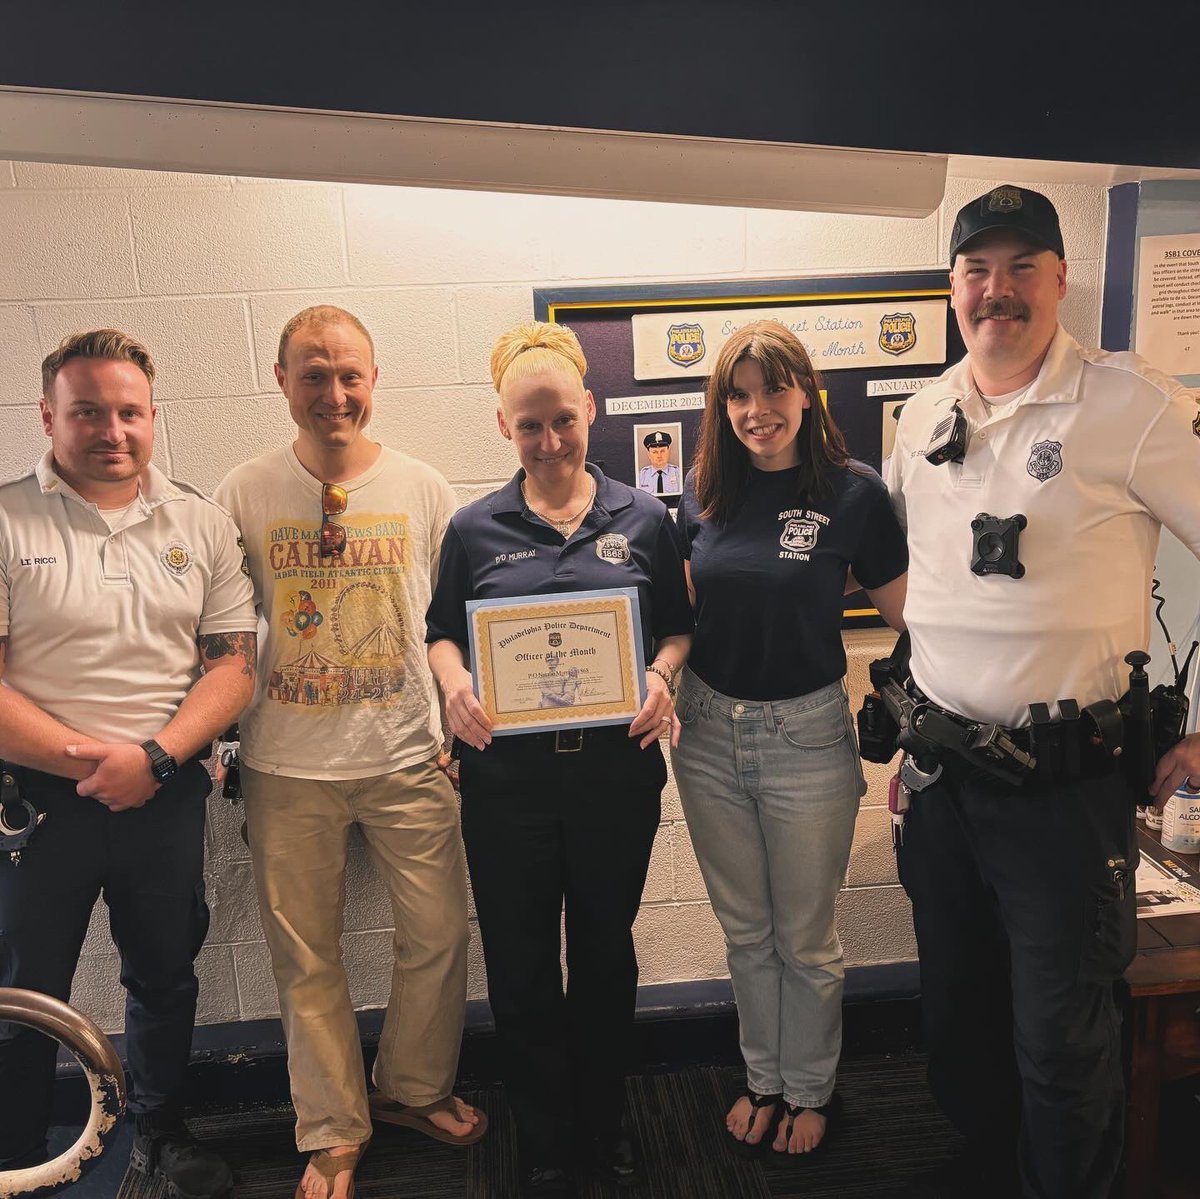 Community Stakeholders stopped by the mini station this week to present the South Street Officer of the Month award to the following for their outstanding service to the community! 

February- Ofc. Tommy Lewis 
March-Ofc. Natalie Murray 

Great work! 

#PhillyPD #PhillyPolice